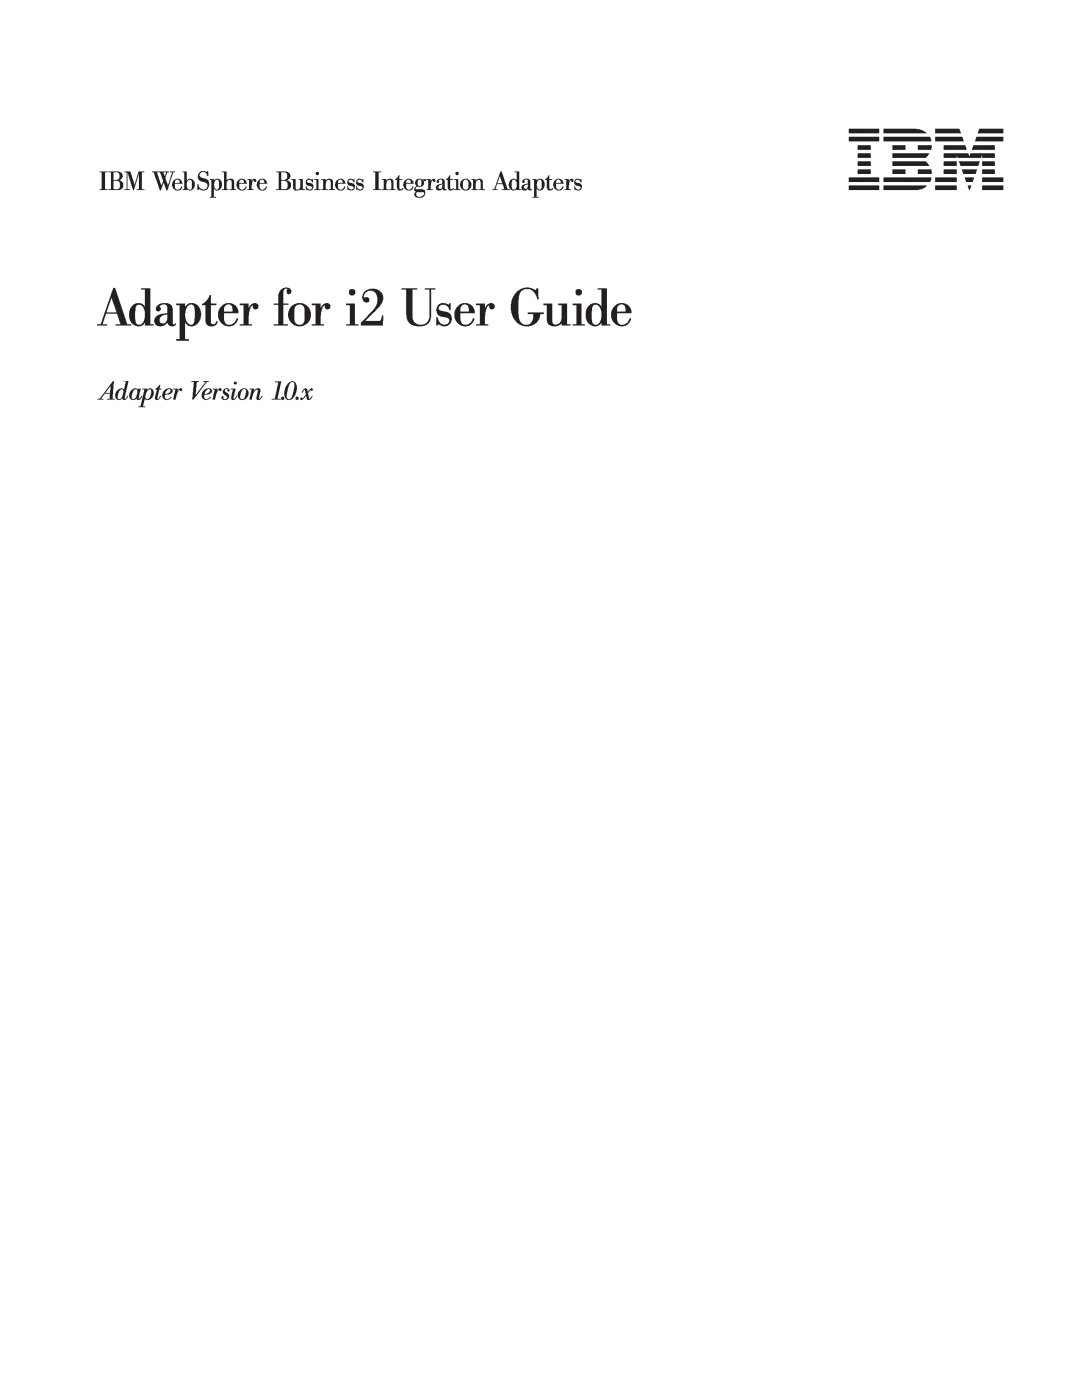 IBM manual Adapter for i2 User Guide, IBM WebSphere Business Integration Adapters, Adapter Version 